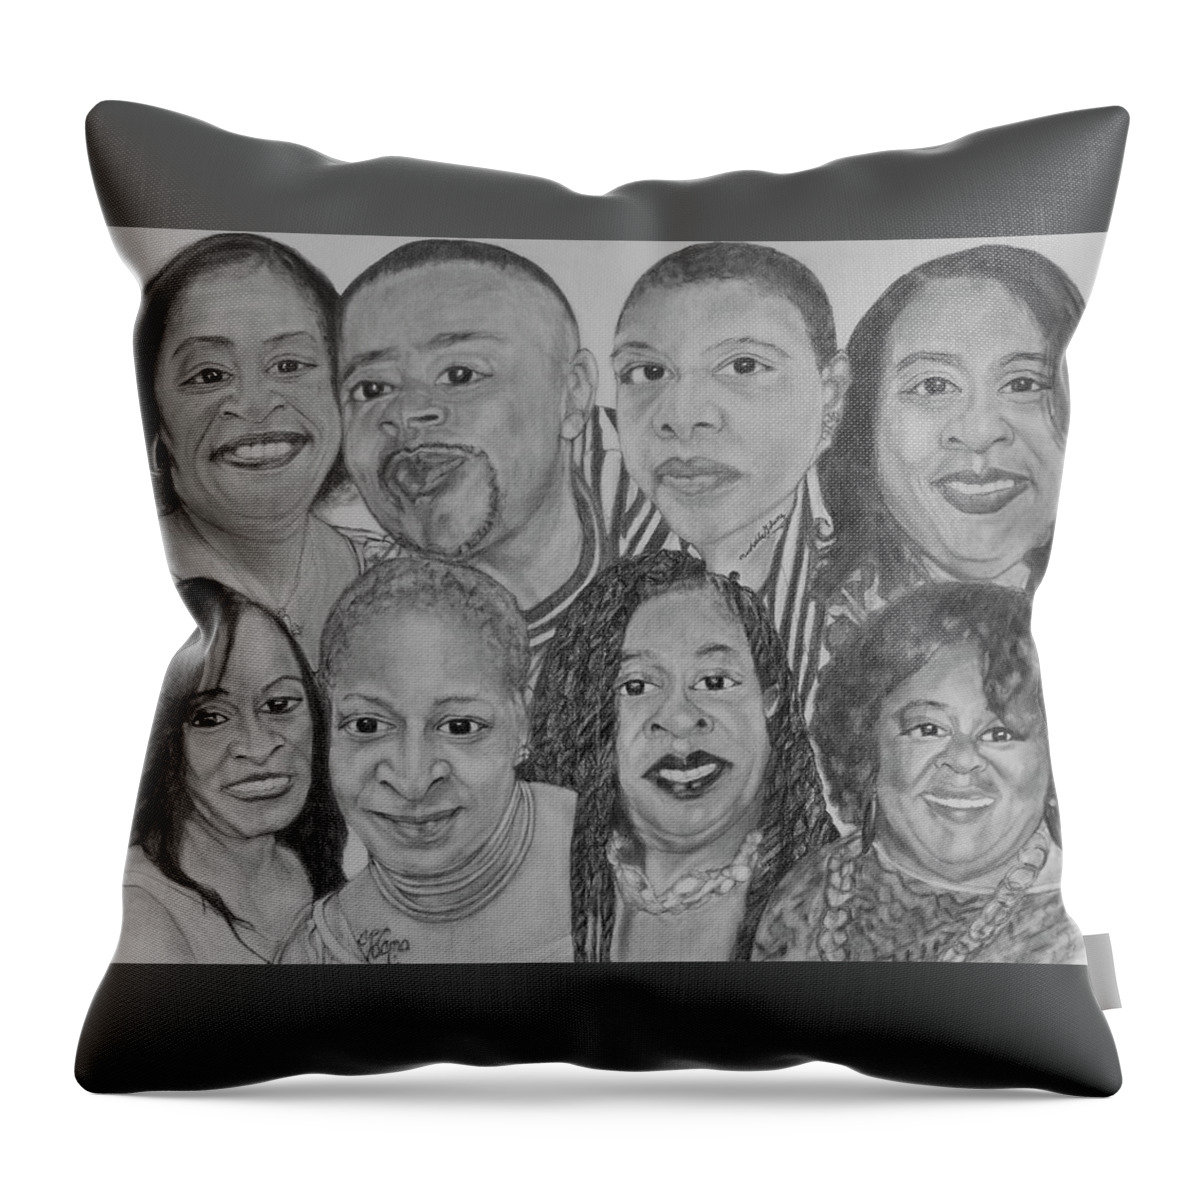 Graphite Throw Pillow featuring the drawing All Of Us by Michelle Gilmore